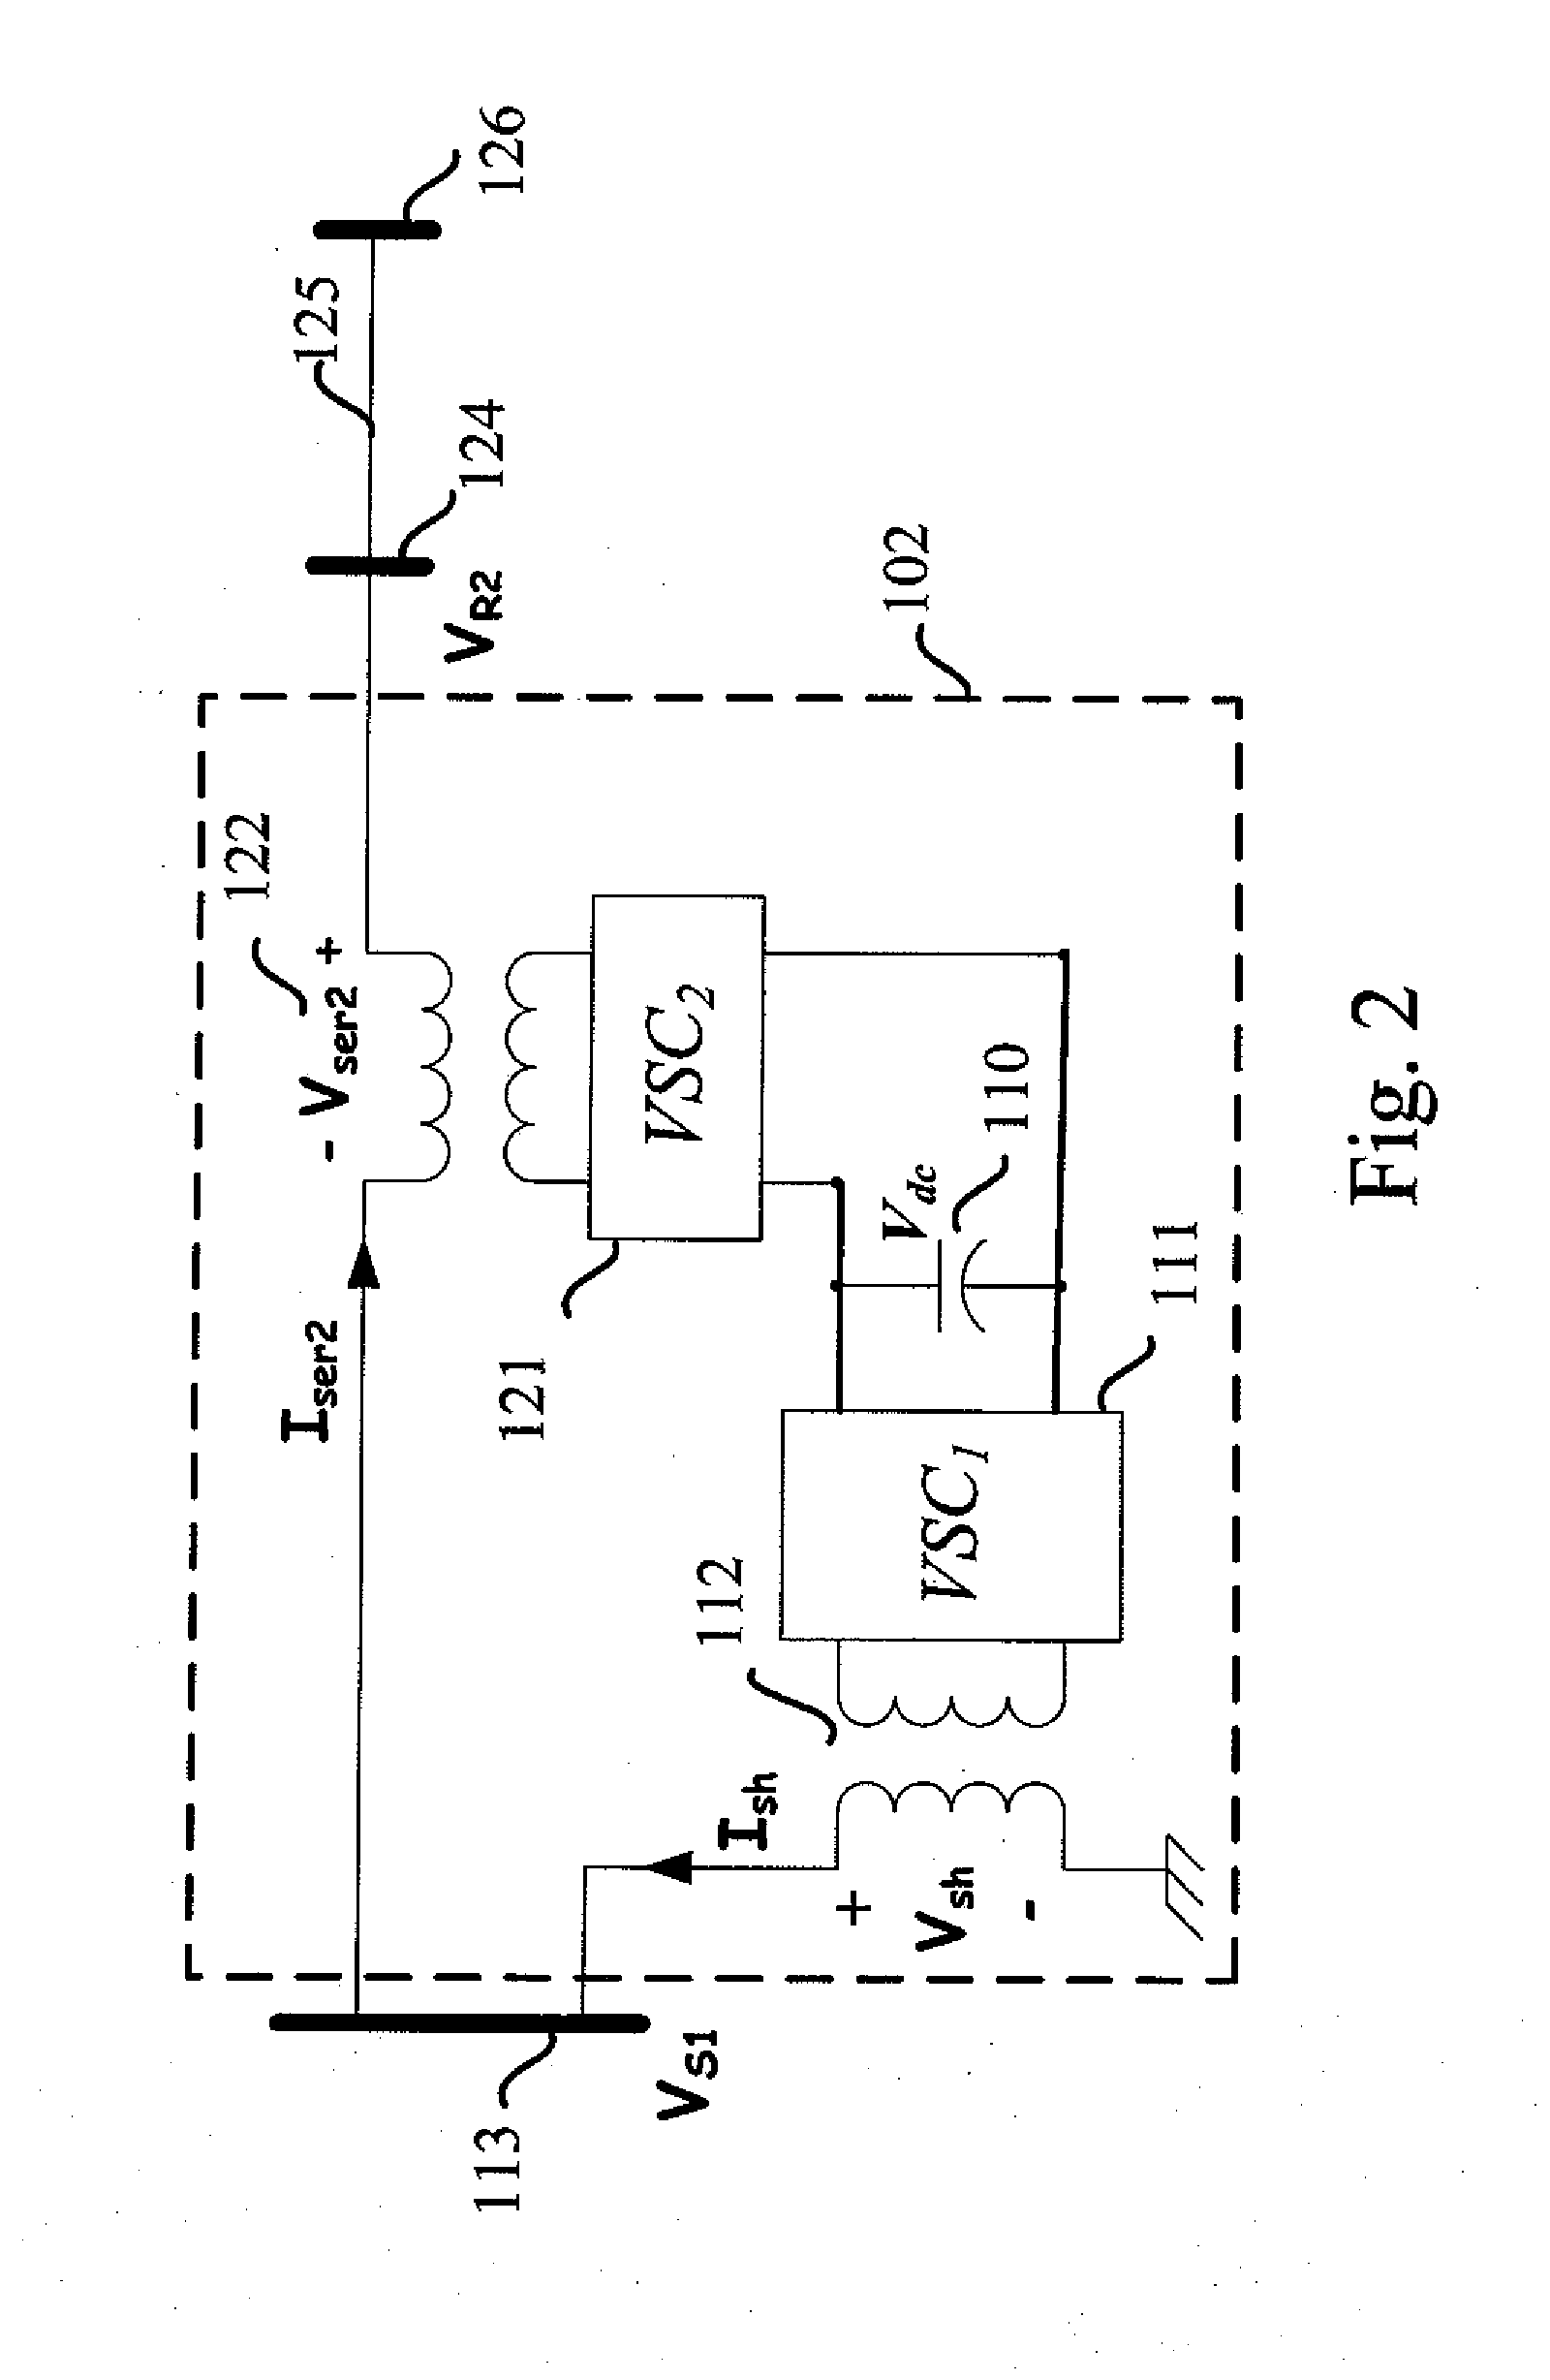 Method of Calculating Power Flow Solution of a Power Grid that Includes Generalized Power Flow Controllers